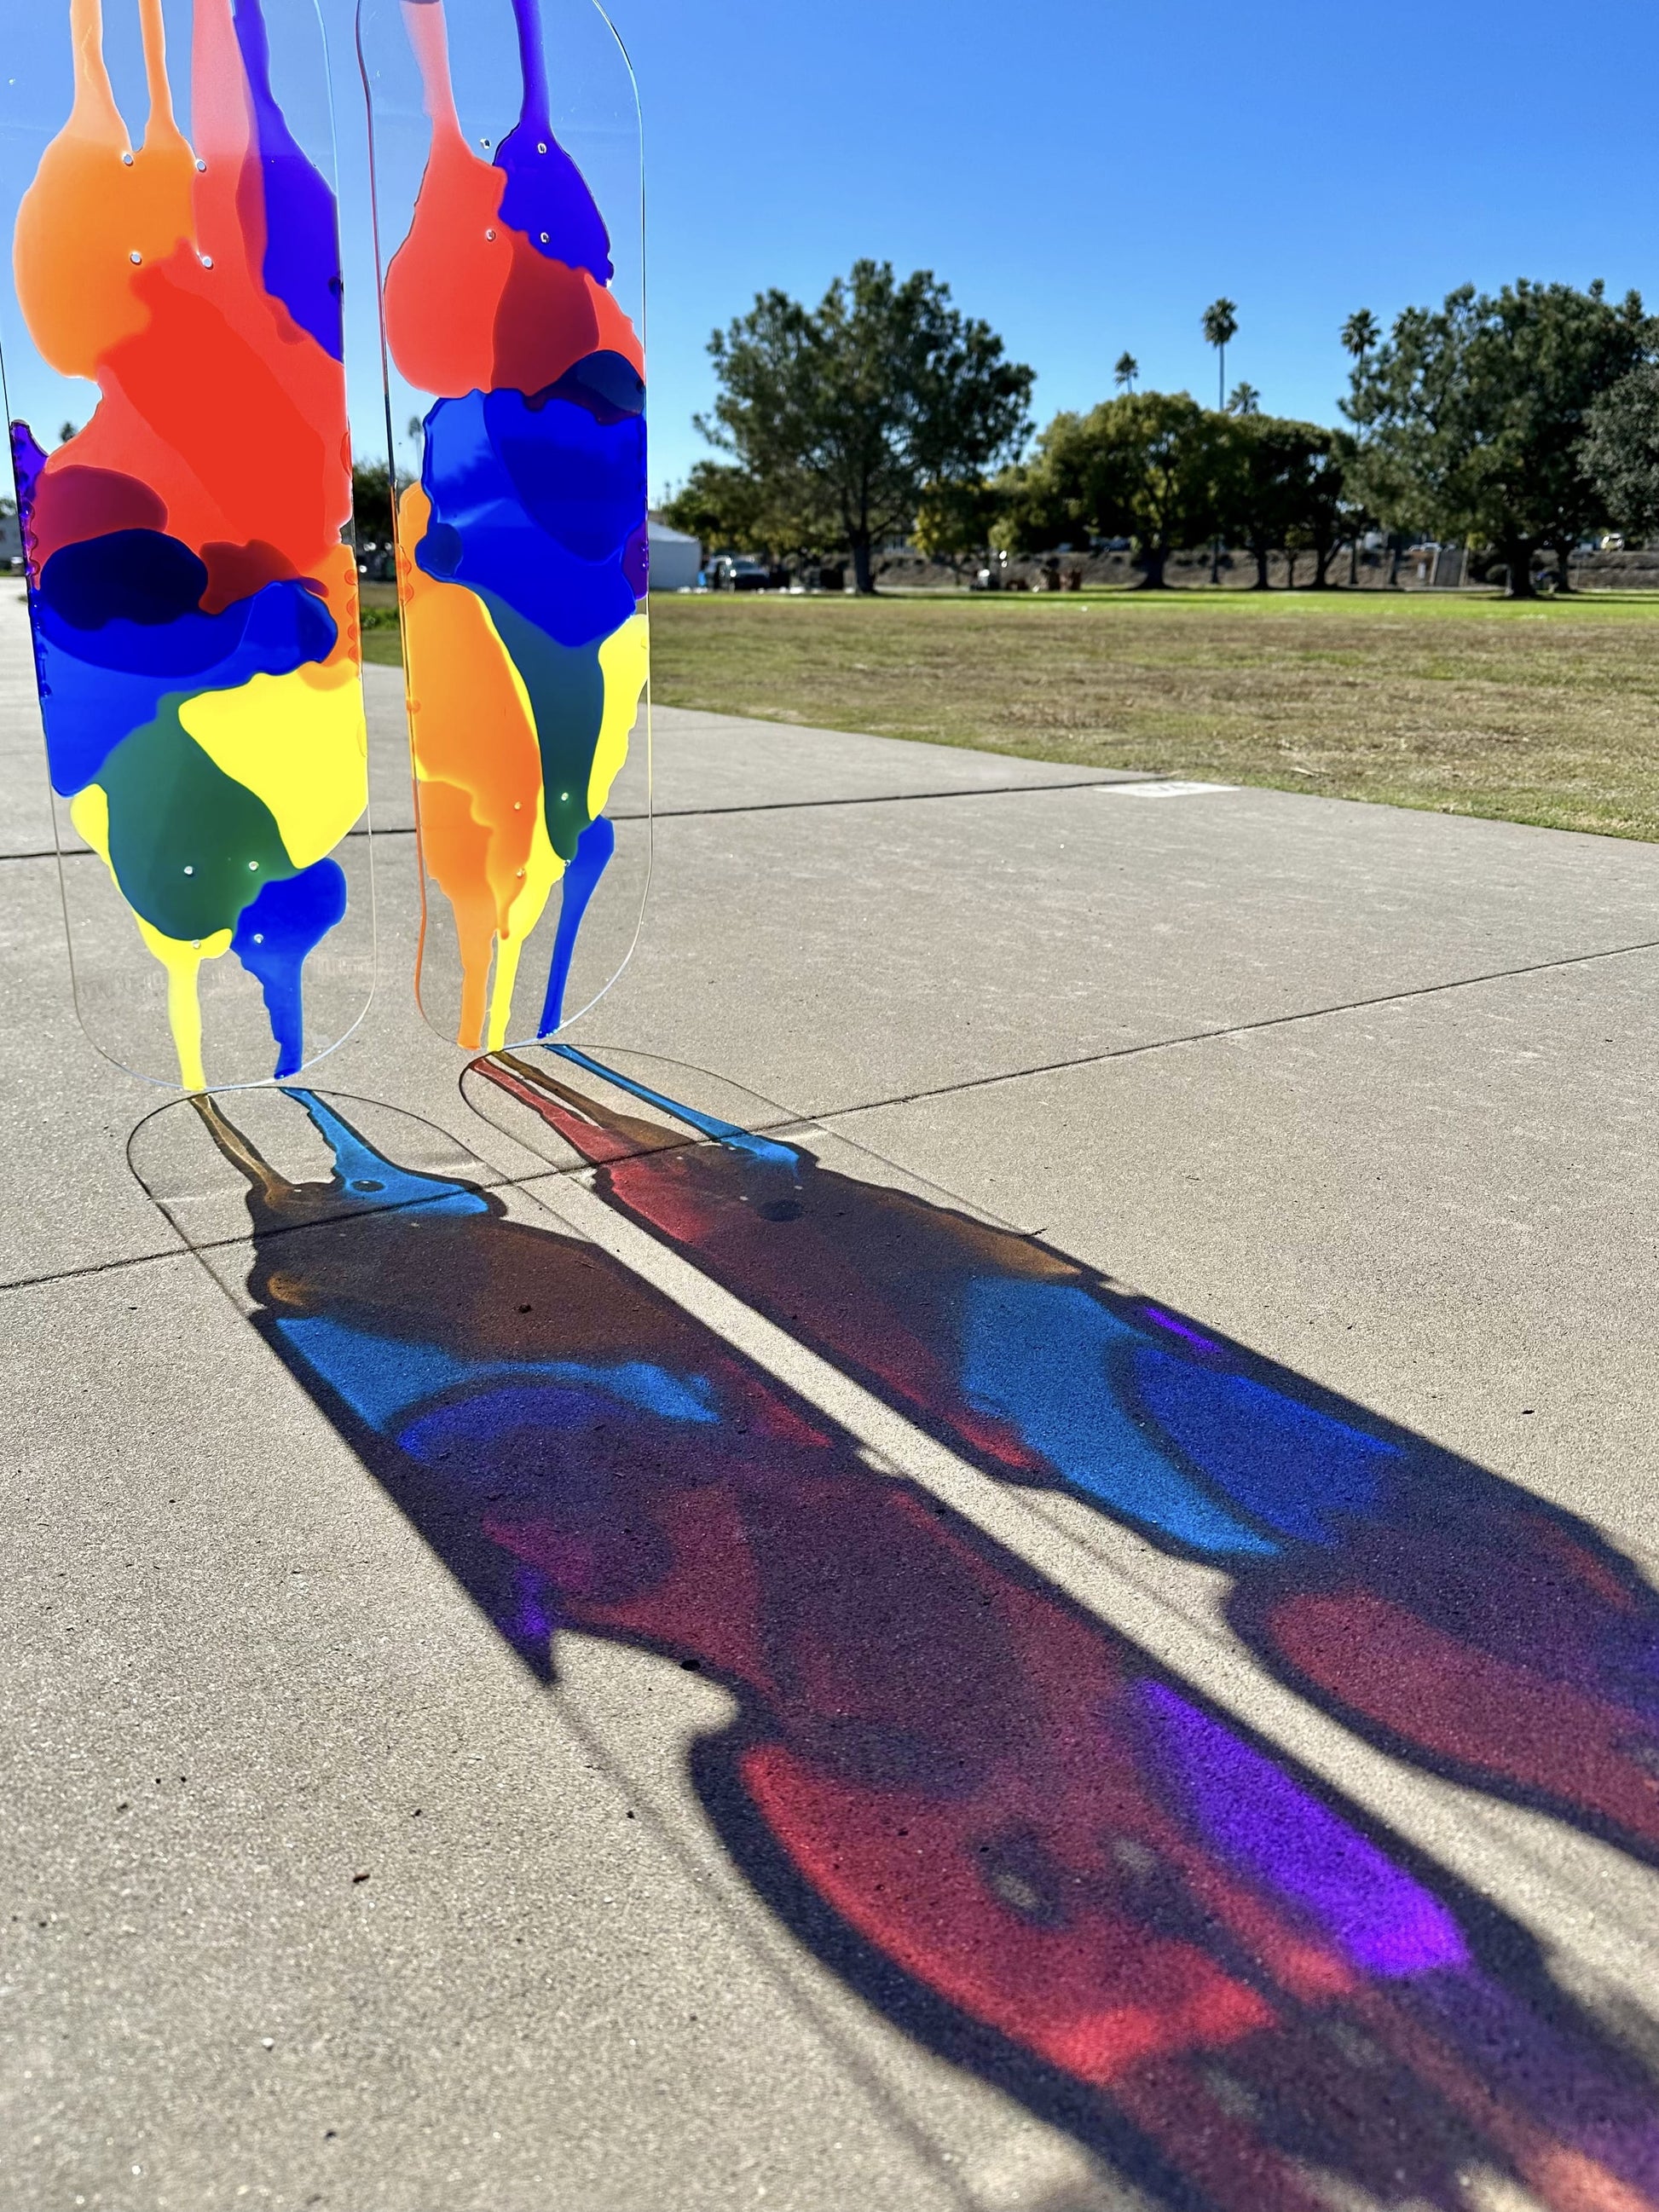 Clear skateboard art with red, orange, yellow, blue and purple resin layers casting colorful shadows on cement.